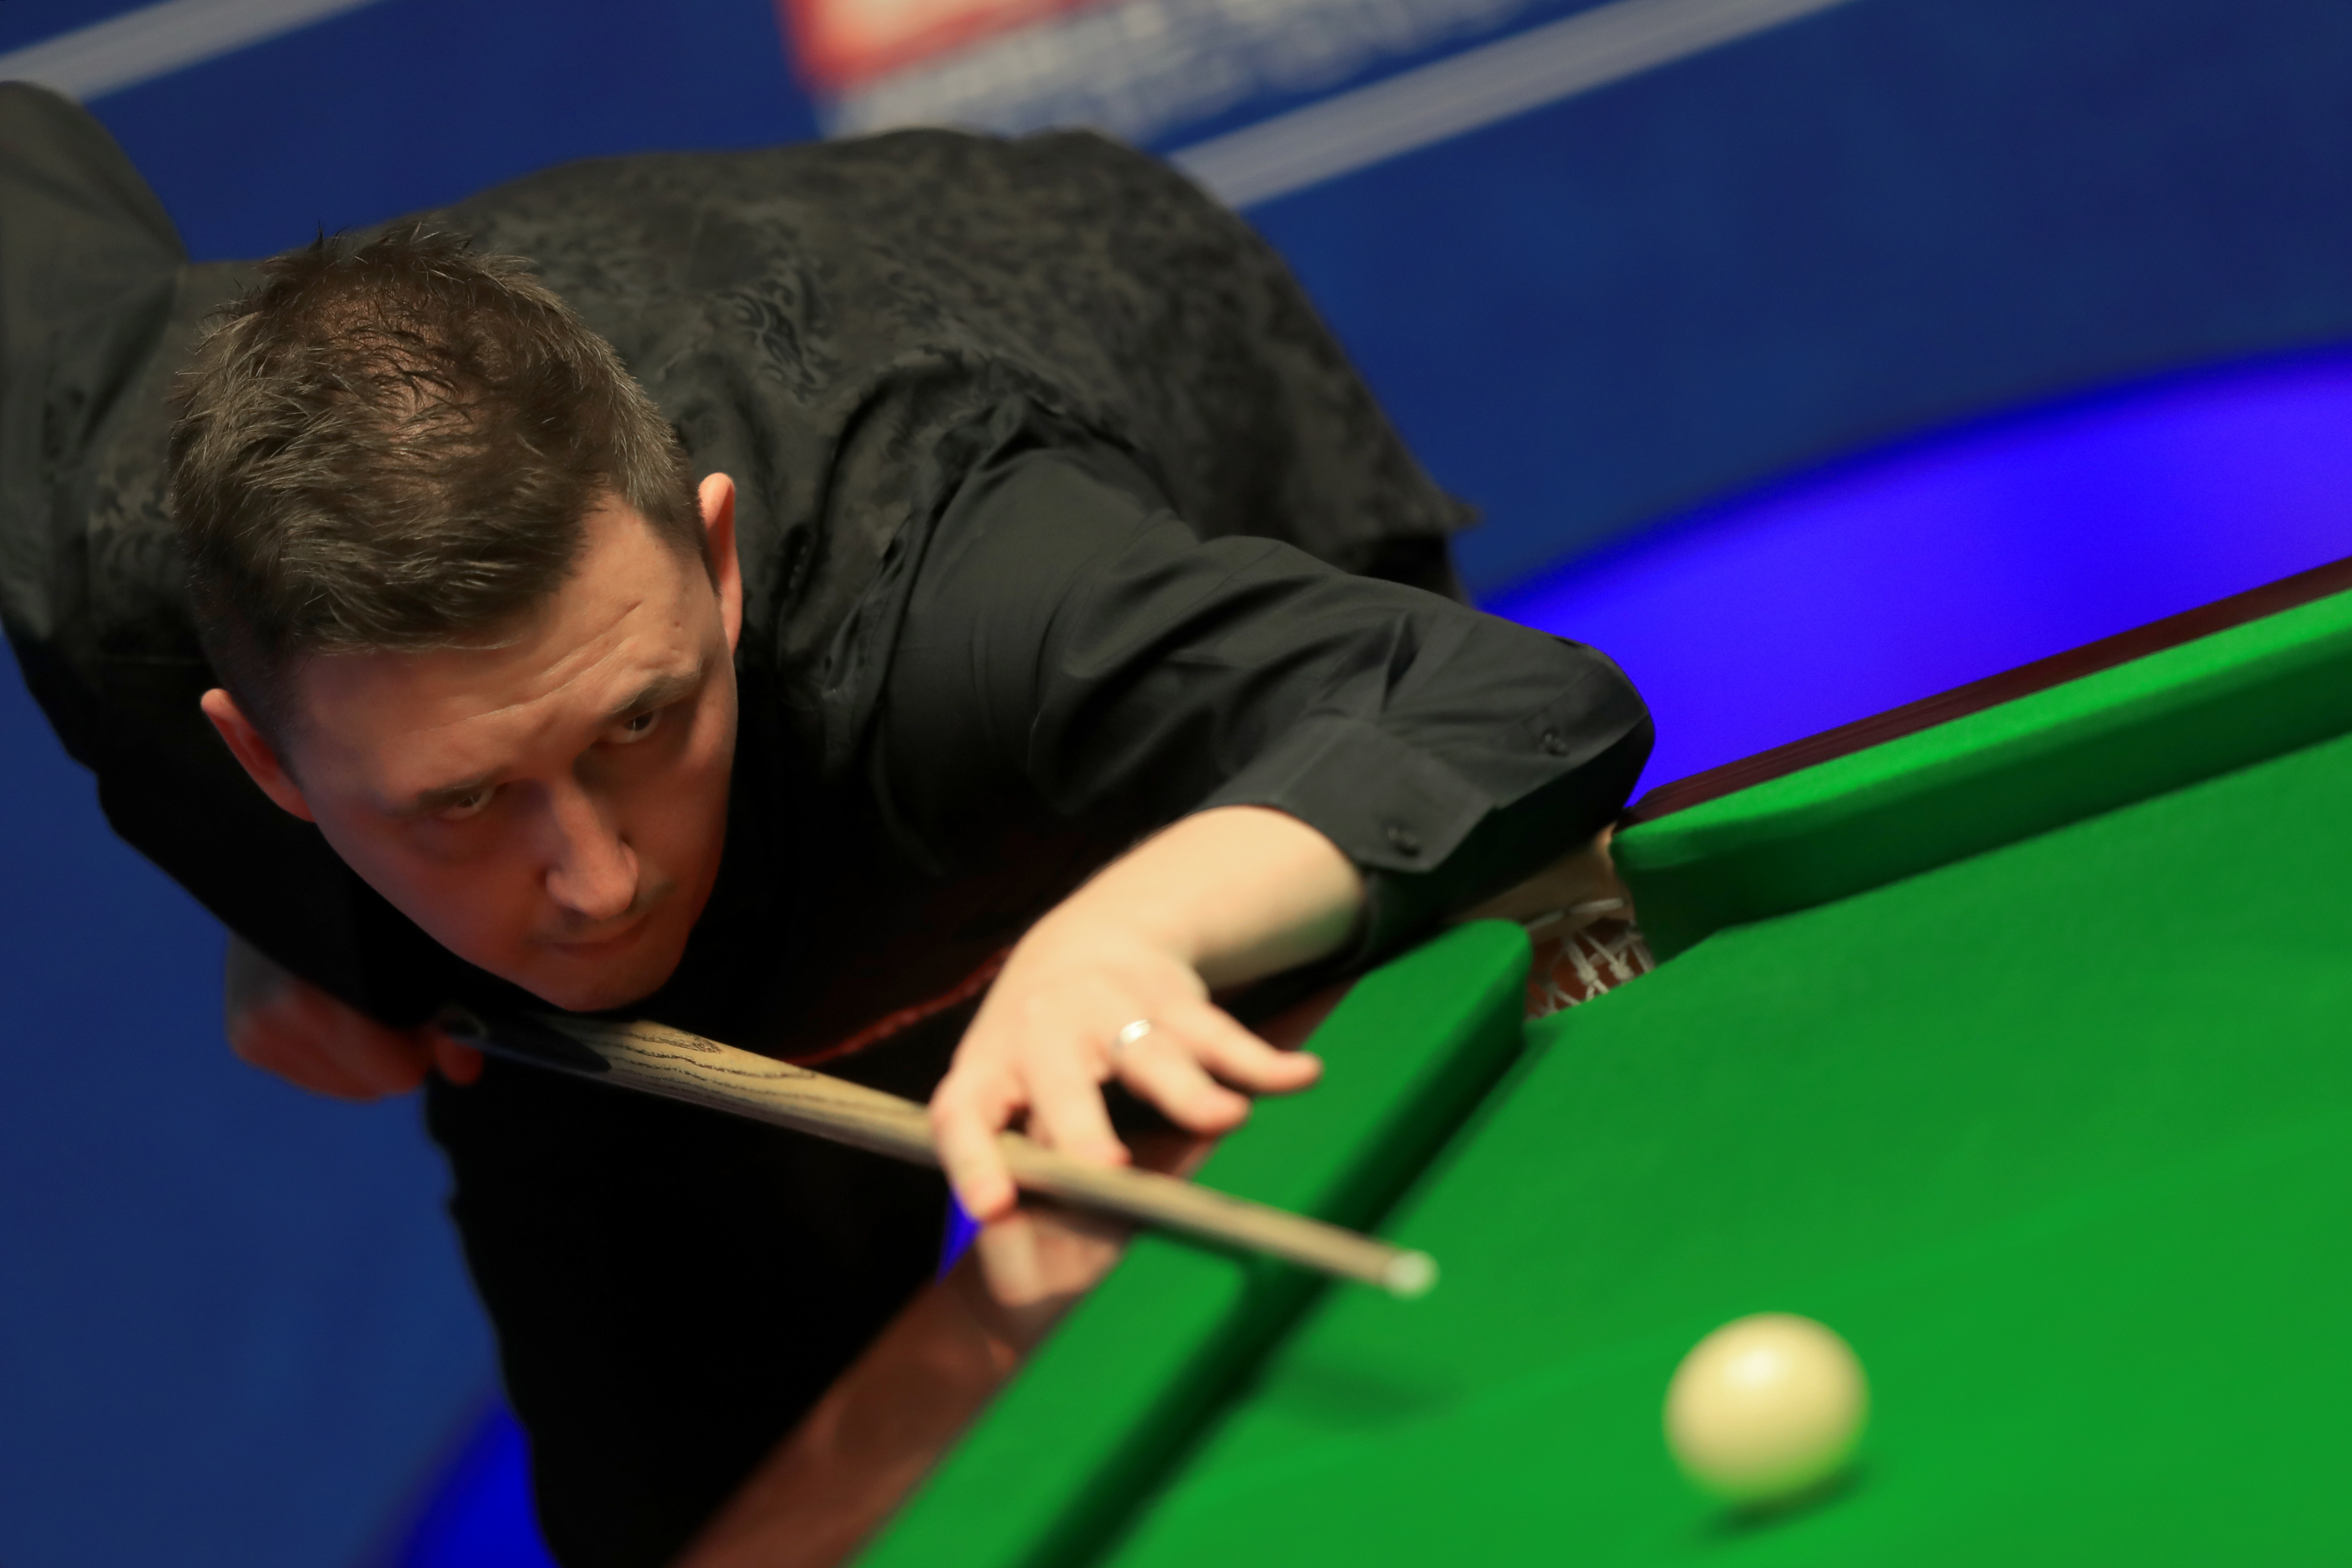 Snooker List of World Snooker Tour players for 2021/22 season